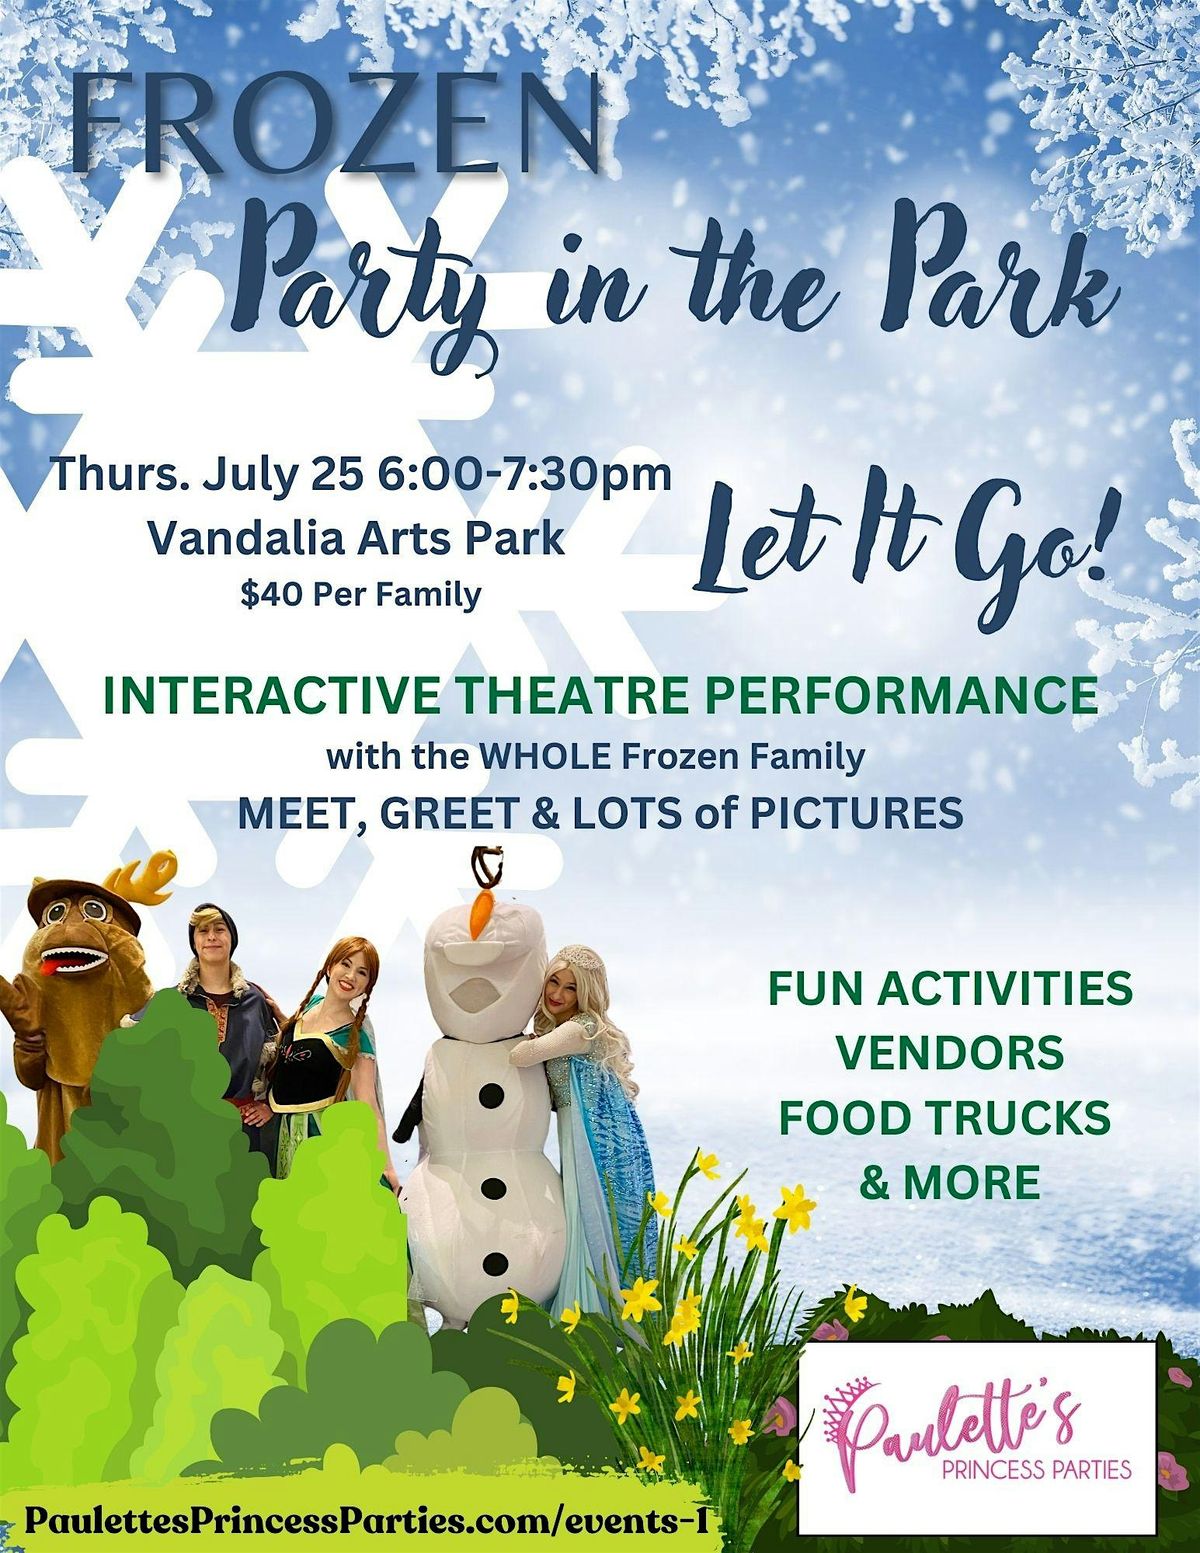 Frozen Party in the Park